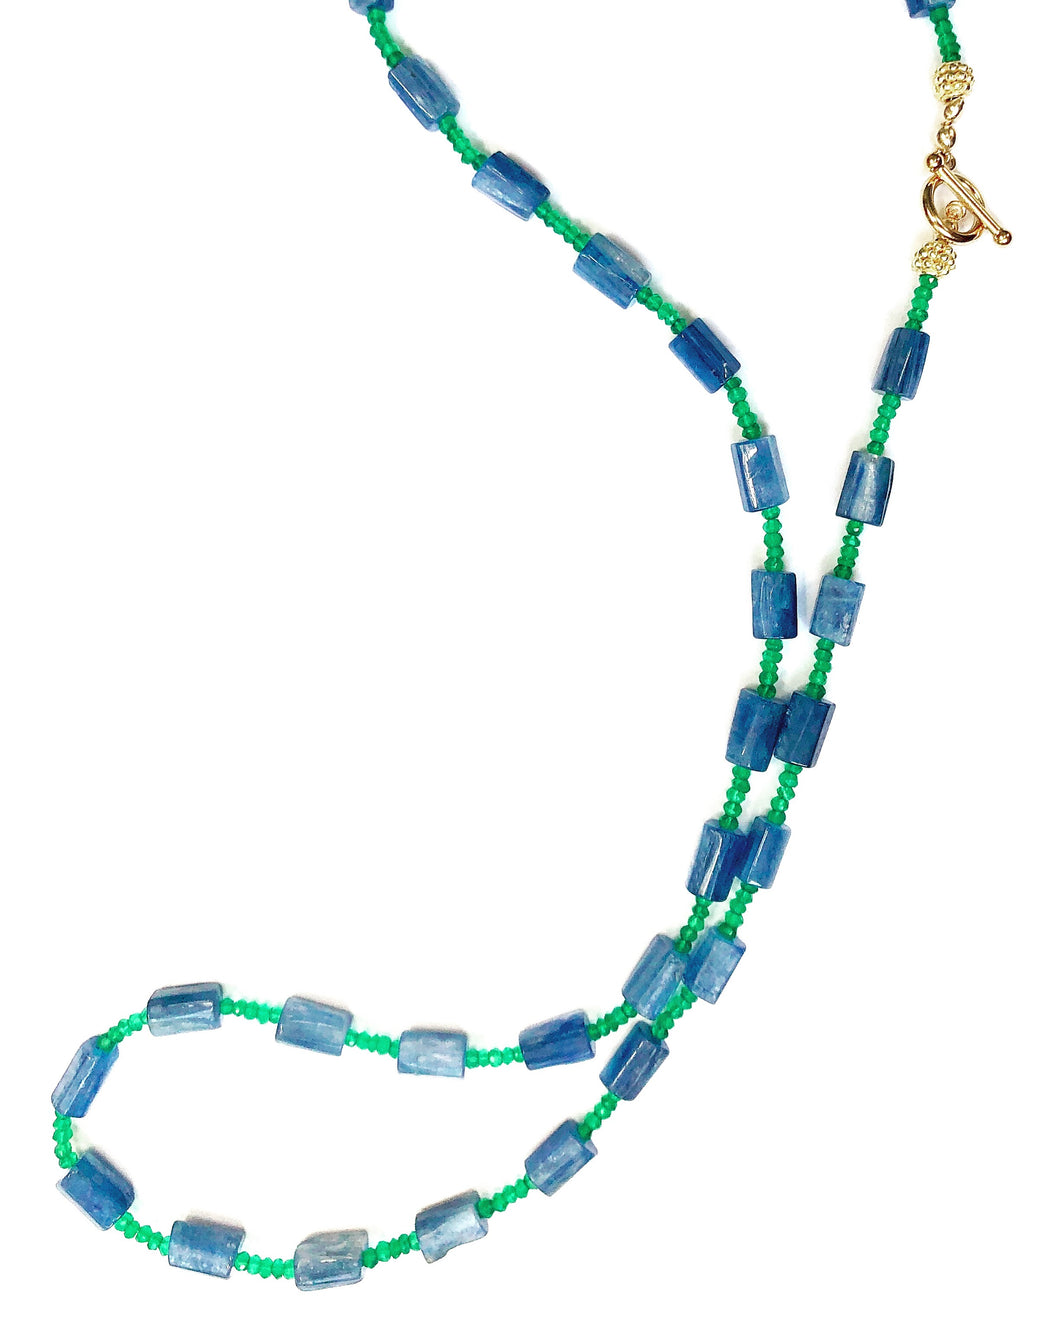 Stunning Kyanite and Green Onyx Necklace